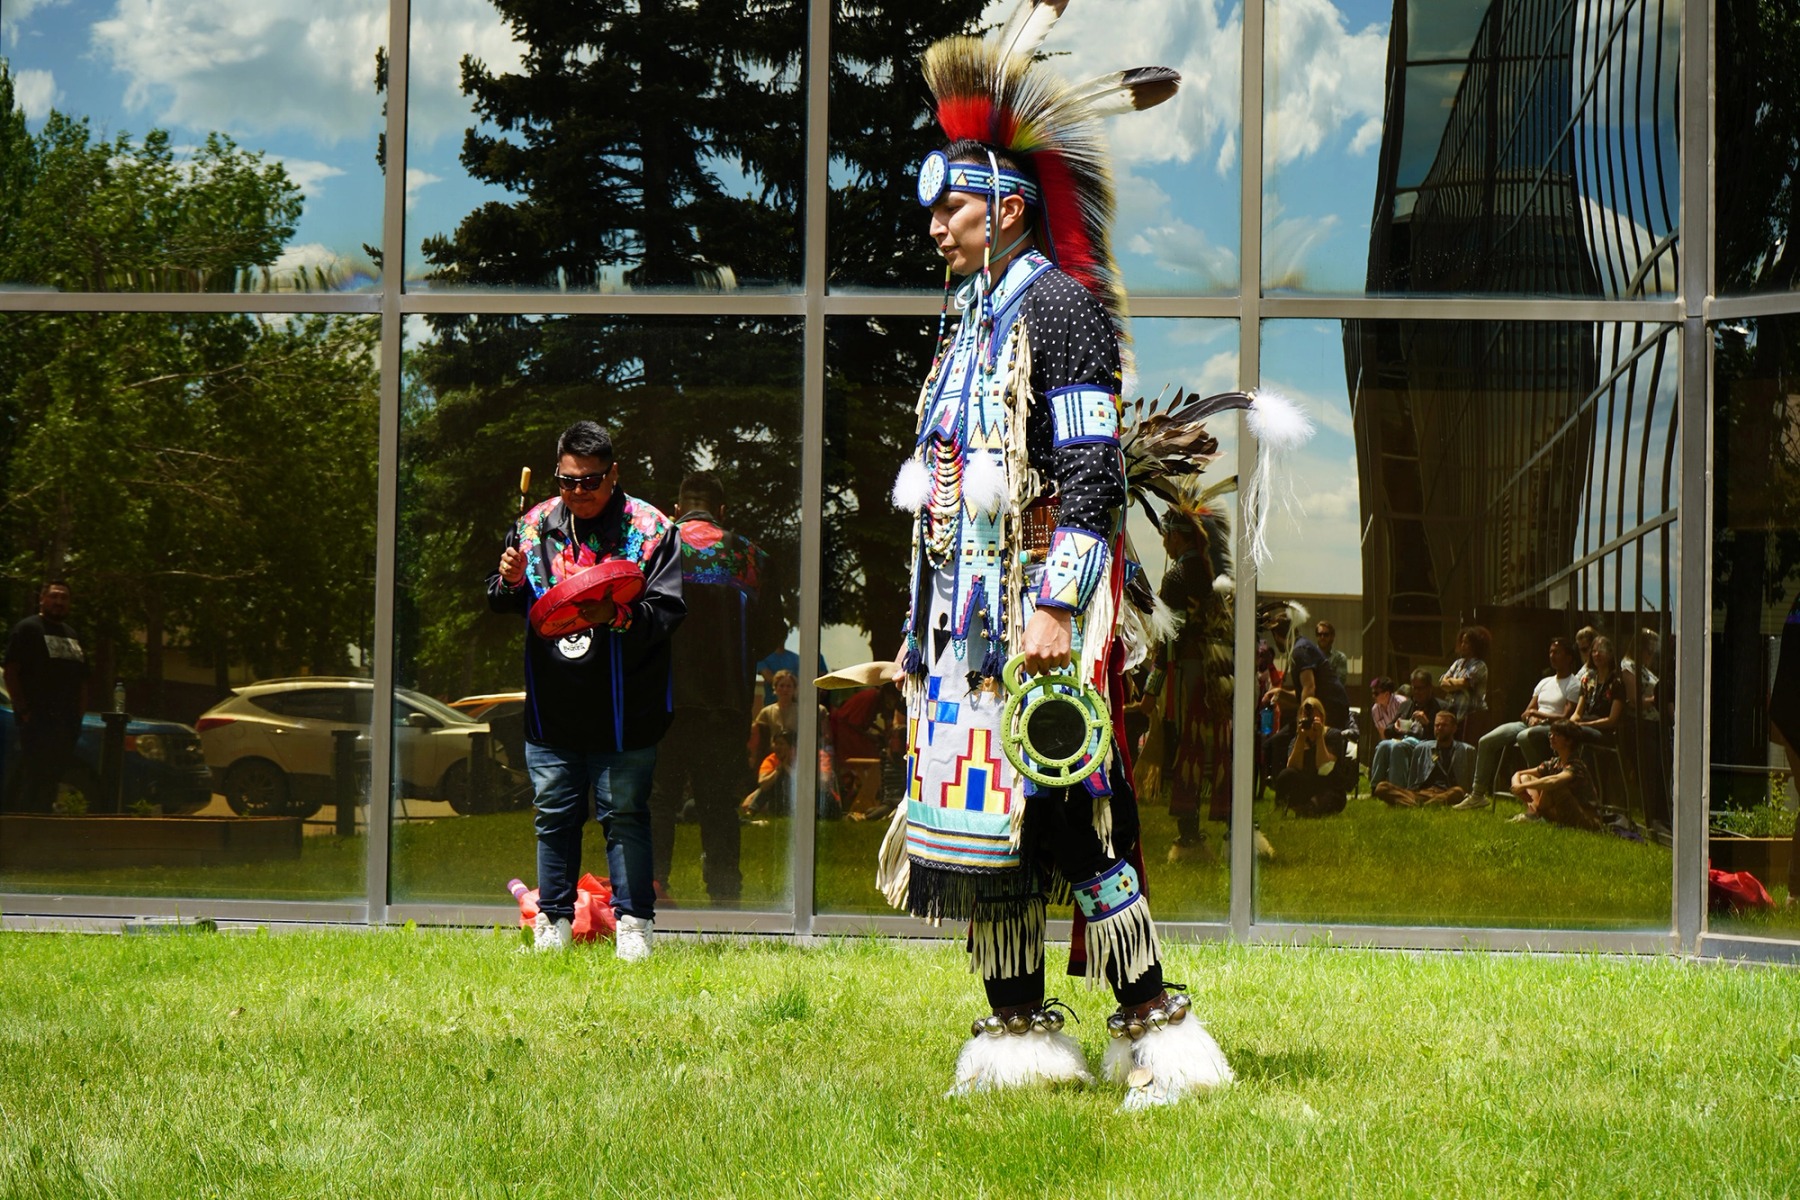 An Indigenous dancer stands outdoors on green grass, while a singer drums and sings. A reflective office building wall is in the background showing an audience.